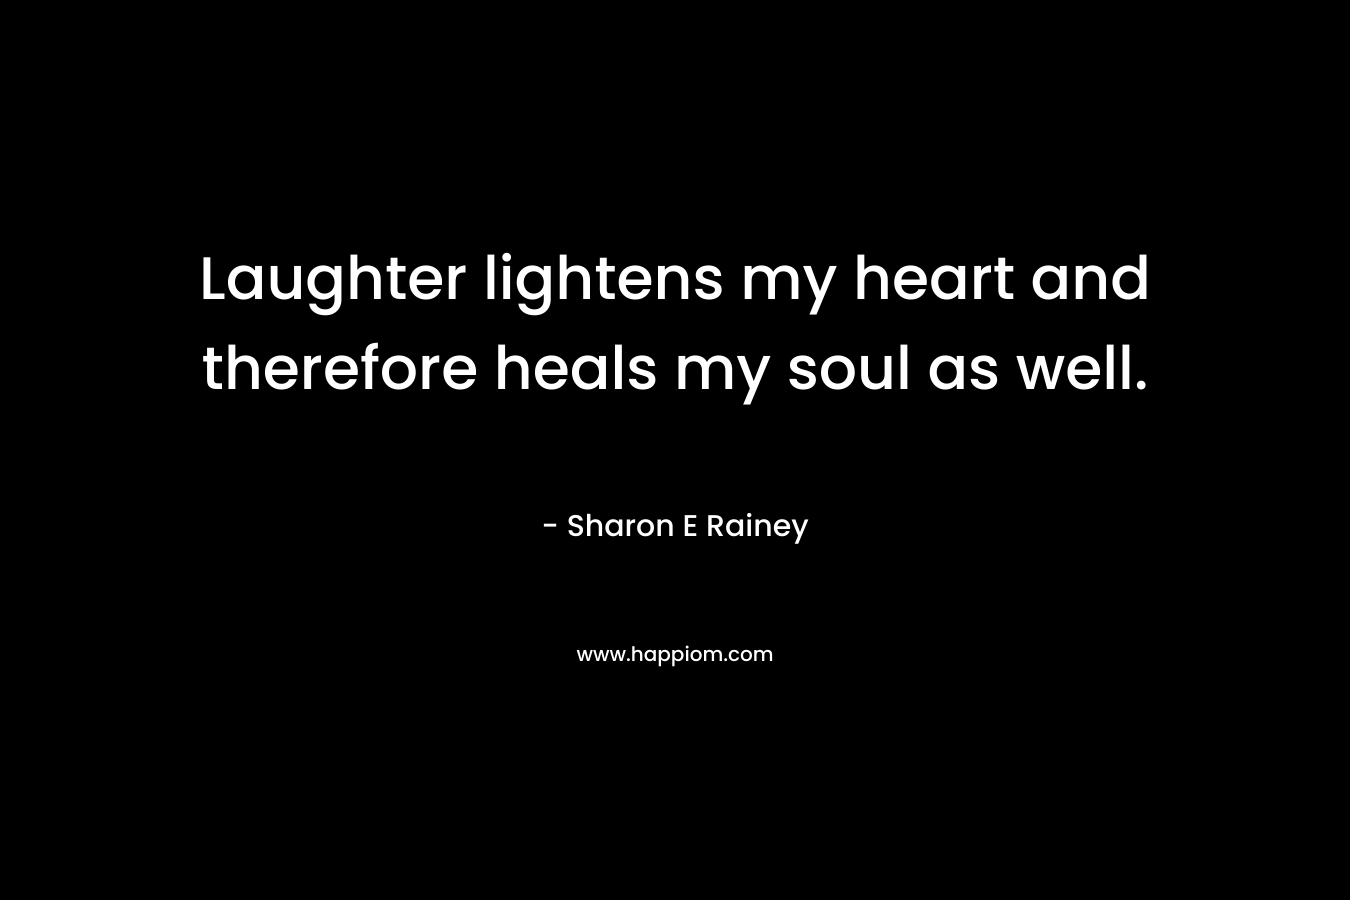 Laughter lightens my heart and therefore heals my soul as well. – Sharon E Rainey